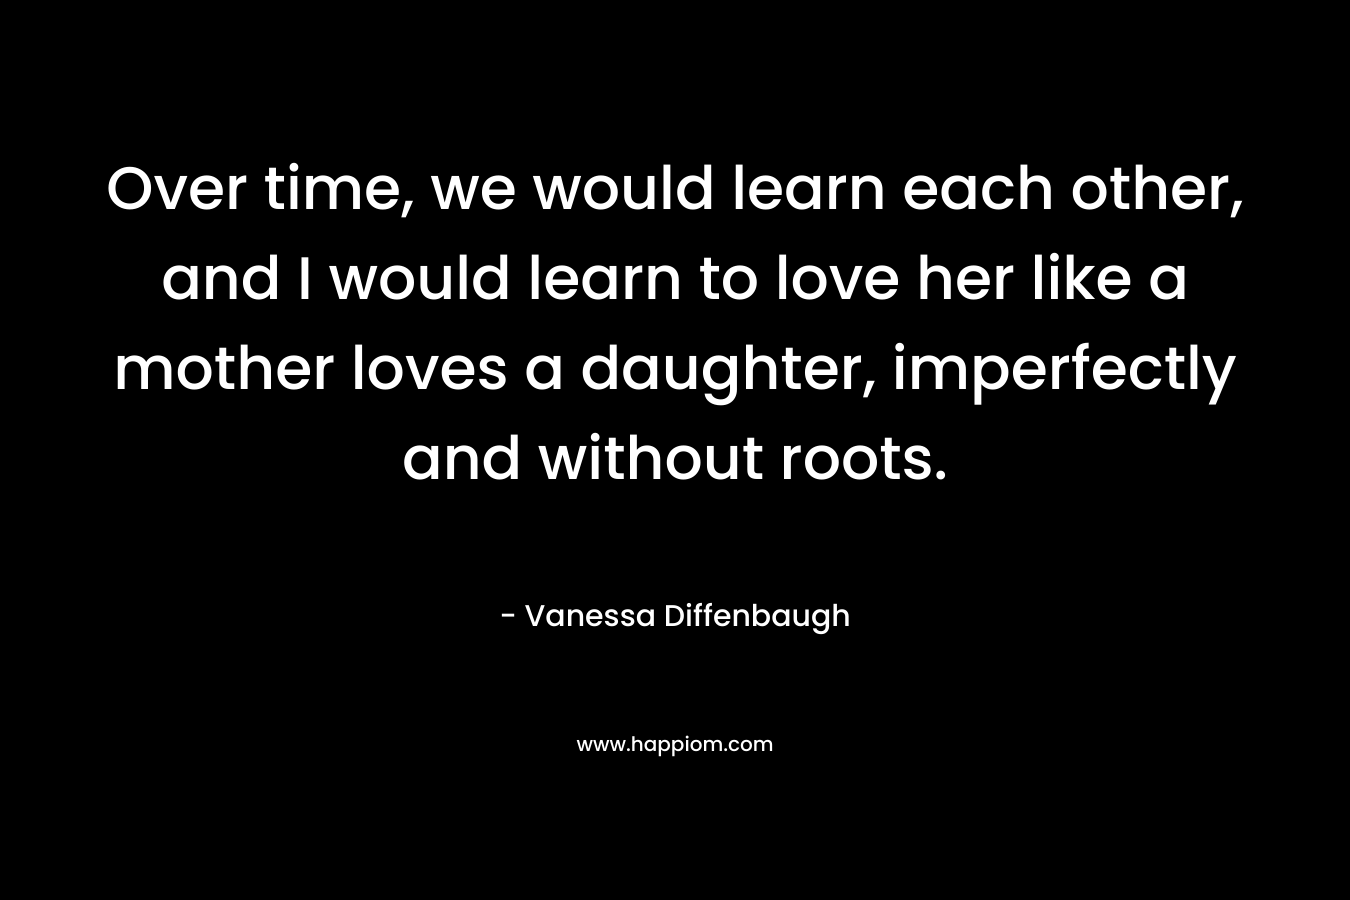 Over time, we would learn each other, and I would learn to love her like a mother loves a daughter, imperfectly and without roots. – Vanessa Diffenbaugh